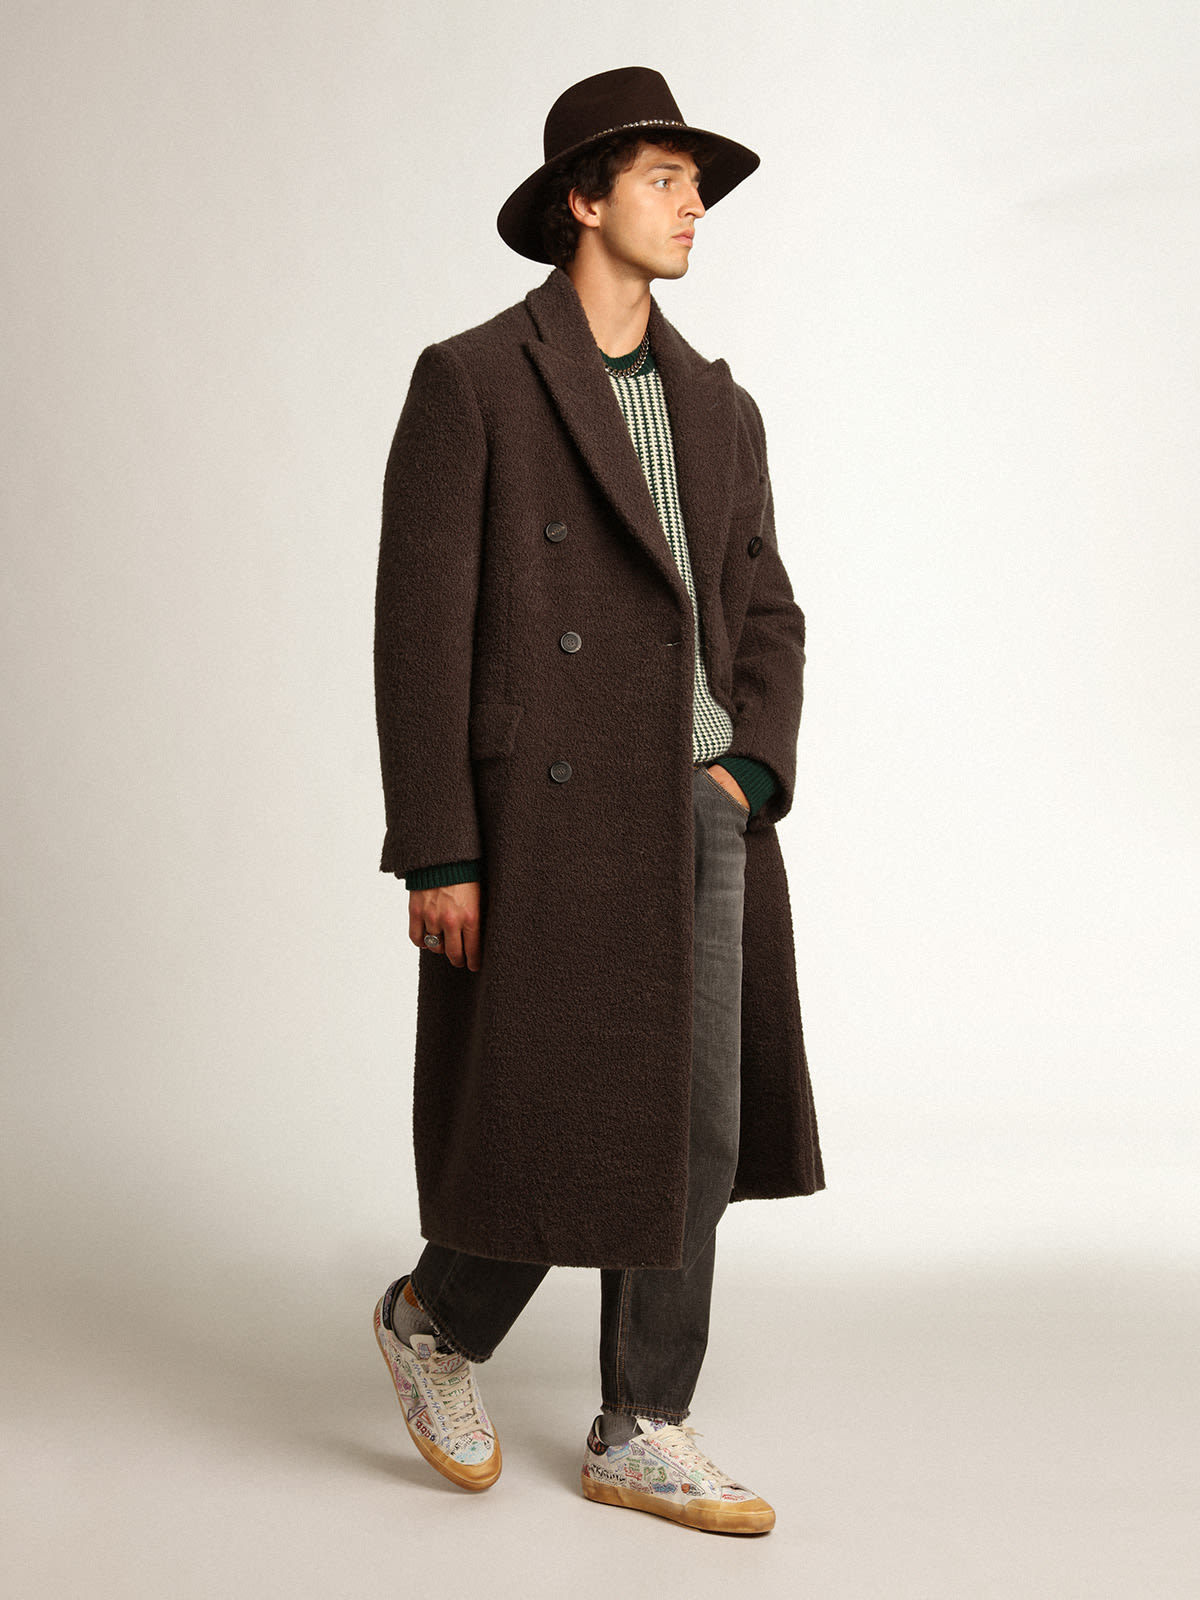 Golden Goose - Journey Collection double-breasted coat in licorice-colored bouclé wool in 